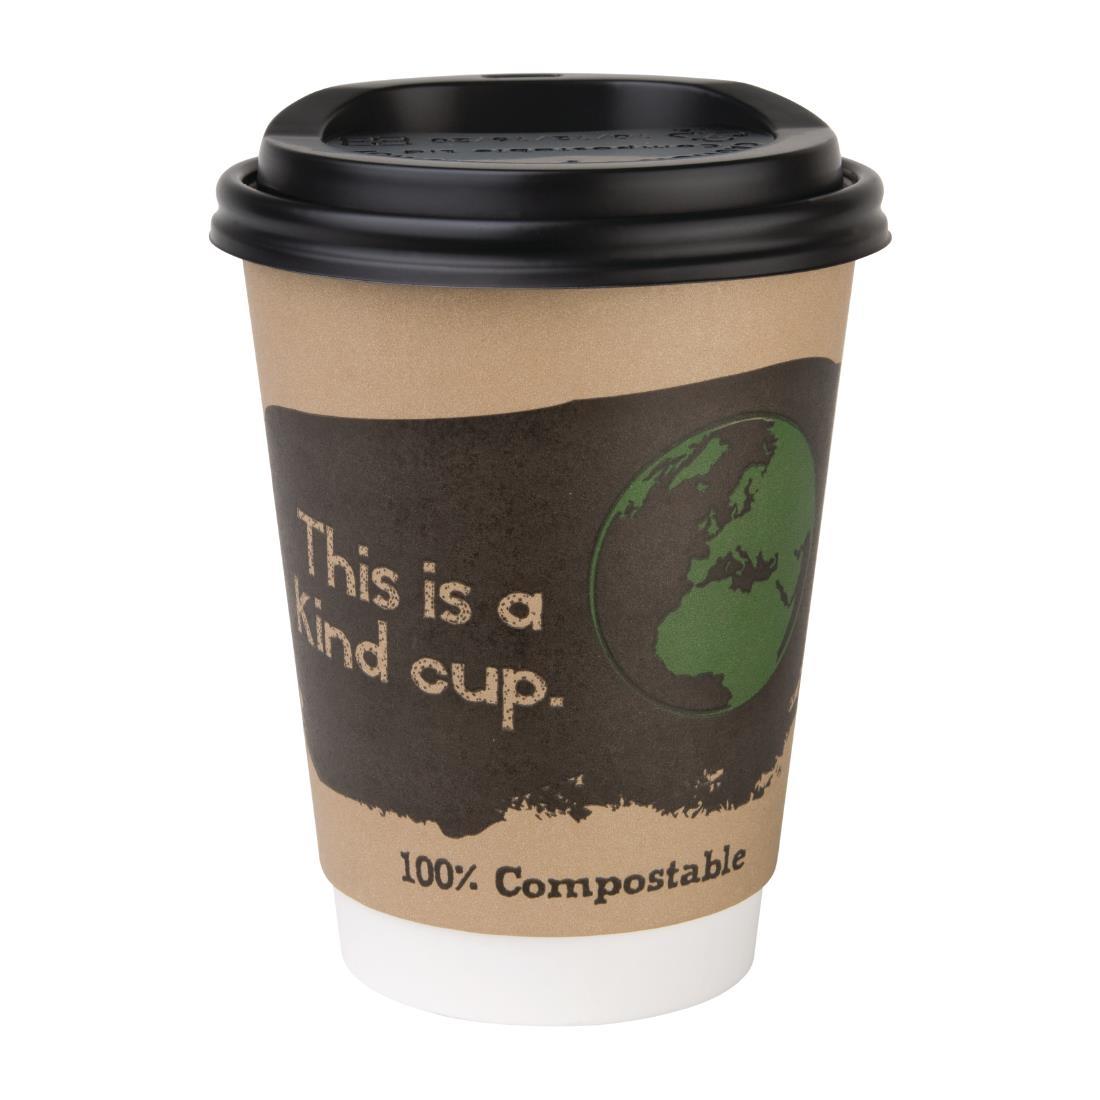 Fiesta Compostable Coffee Cups Double Wall 355ml / 12oz (Pack of 500) - DY987  - 5